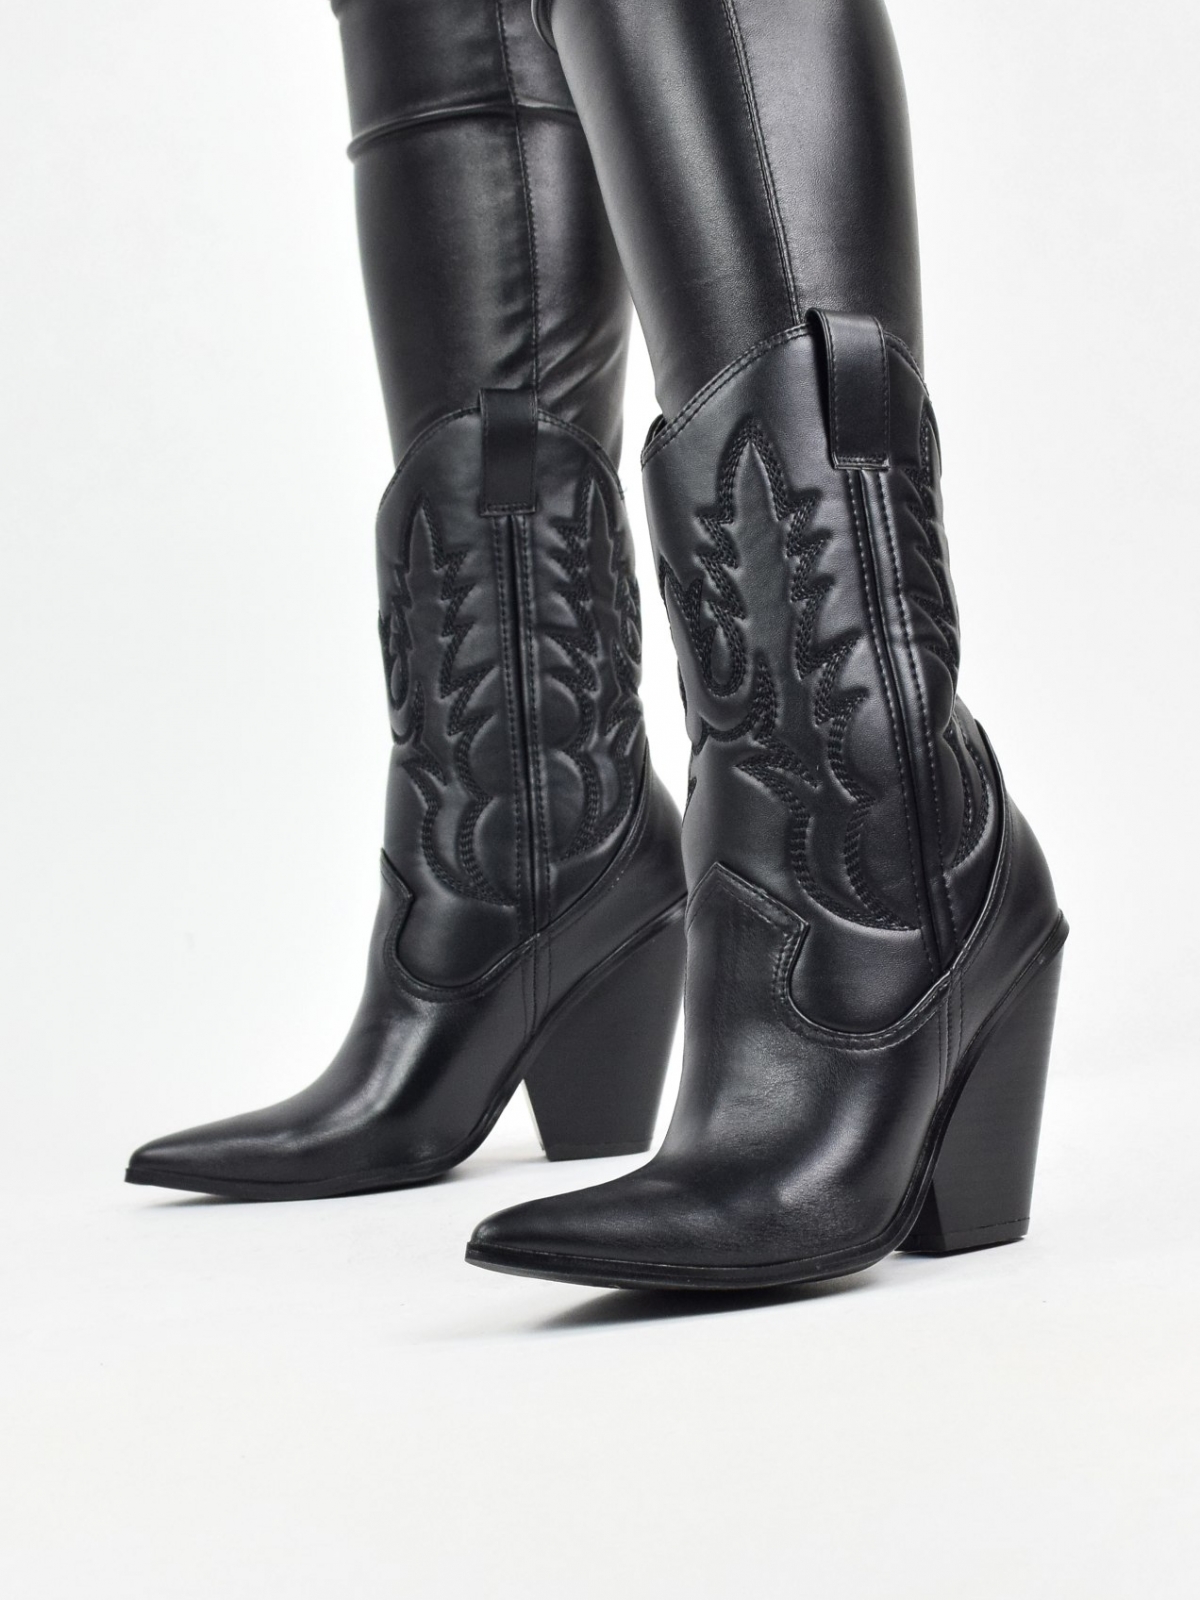 Cowboy style design ankle boots for women in black